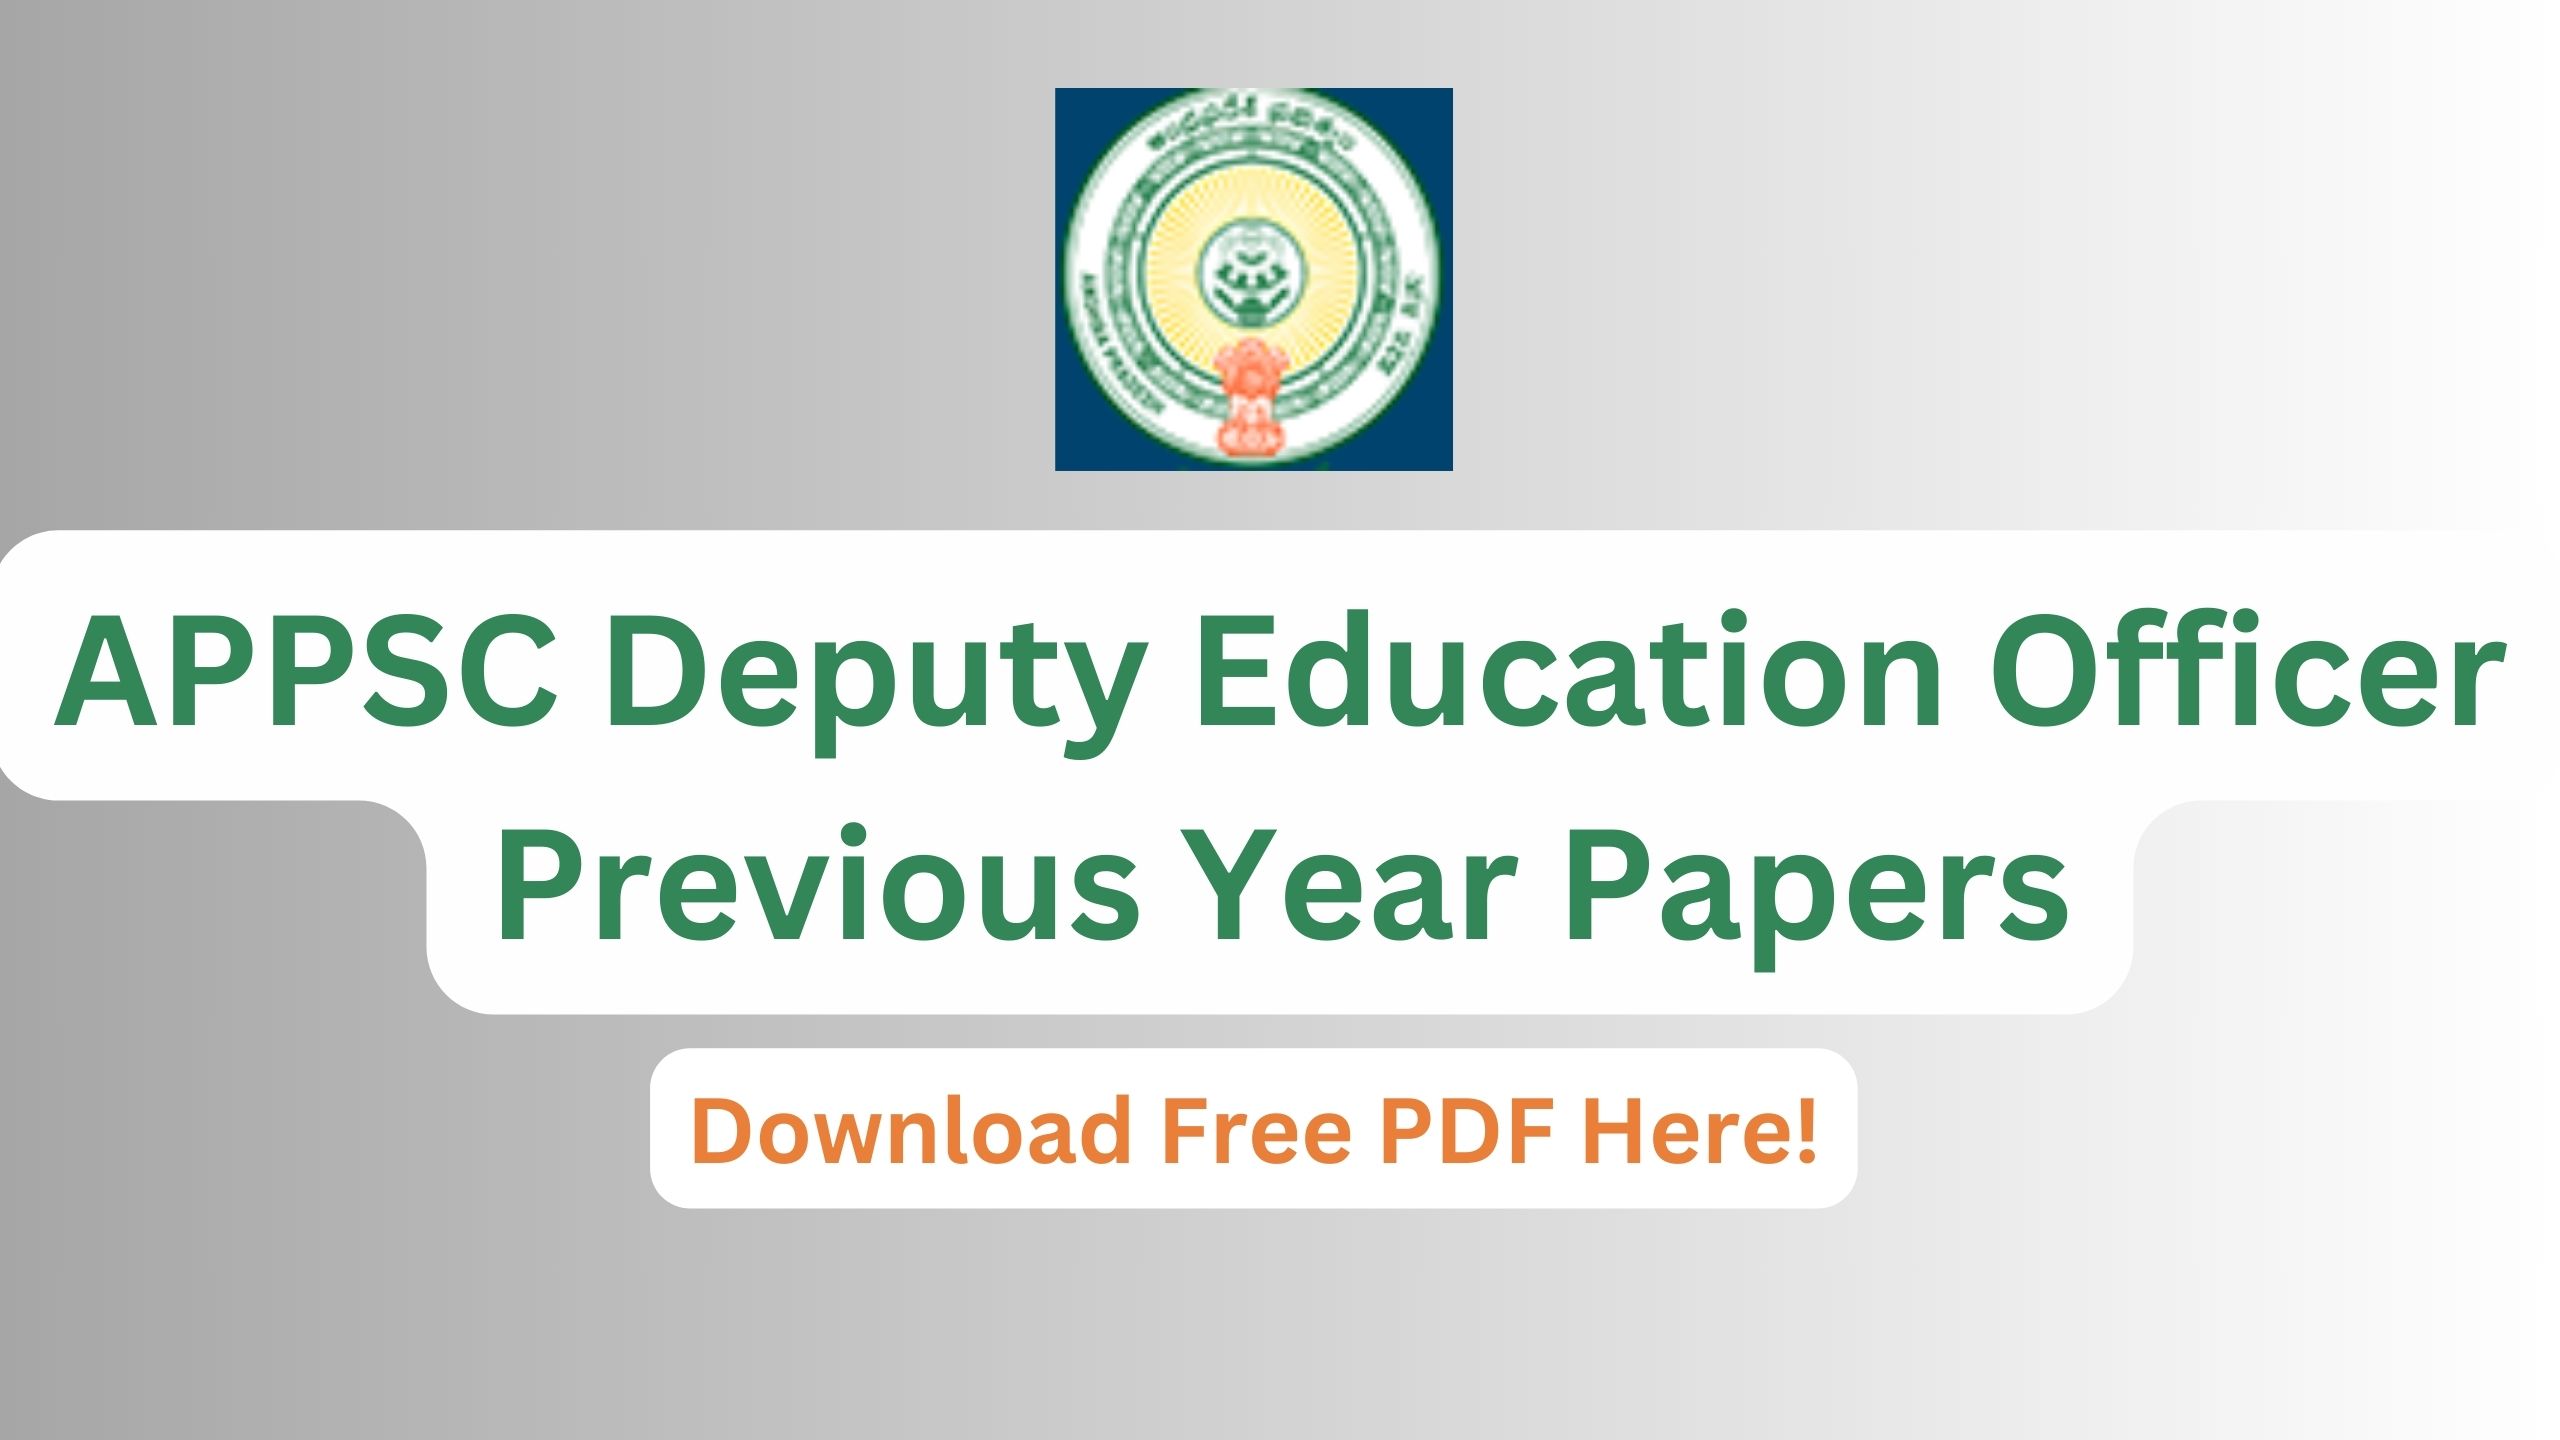 APPSC DEO Previous Year Papers